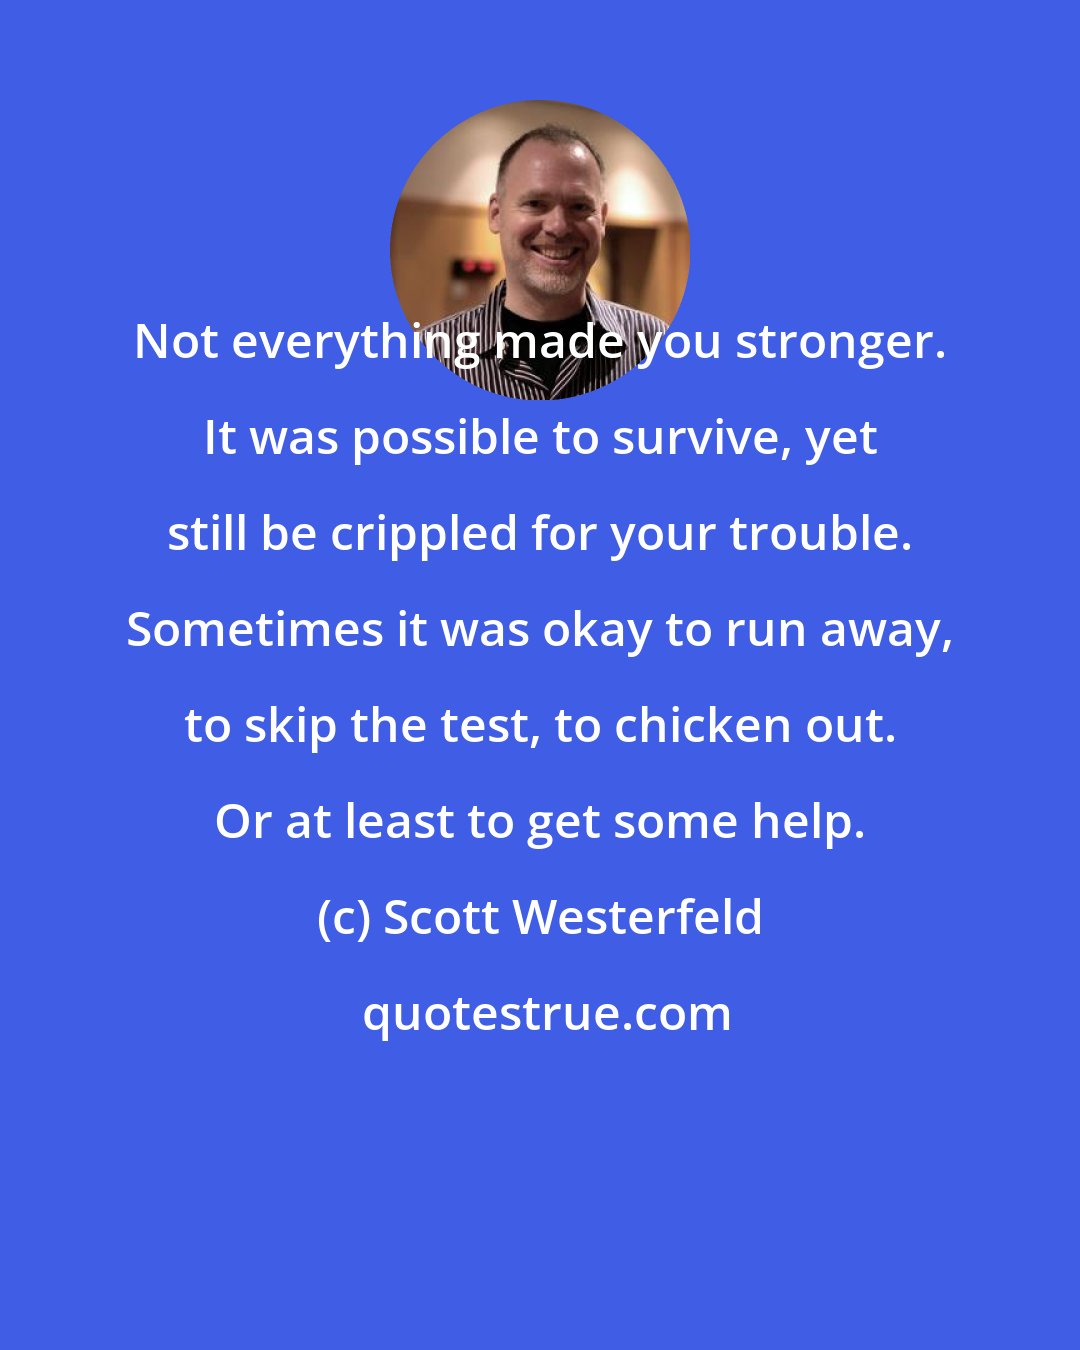 Scott Westerfeld: Not everything made you stronger. It was possible to survive, yet still be crippled for your trouble. Sometimes it was okay to run away, to skip the test, to chicken out. Or at least to get some help.